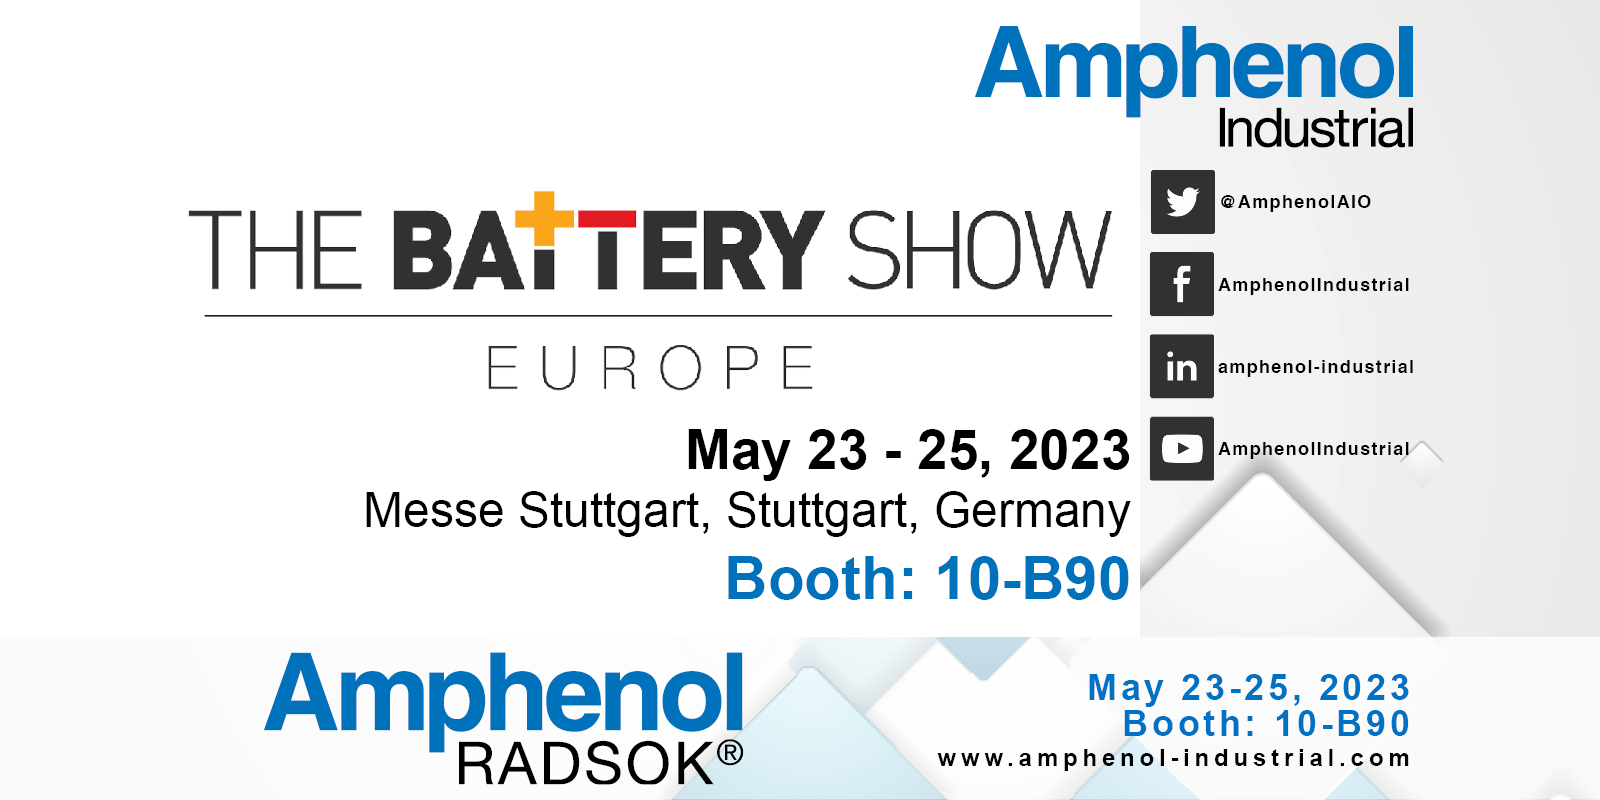 Featured image for “Visit us at The Battery Show Europe 2023 ”